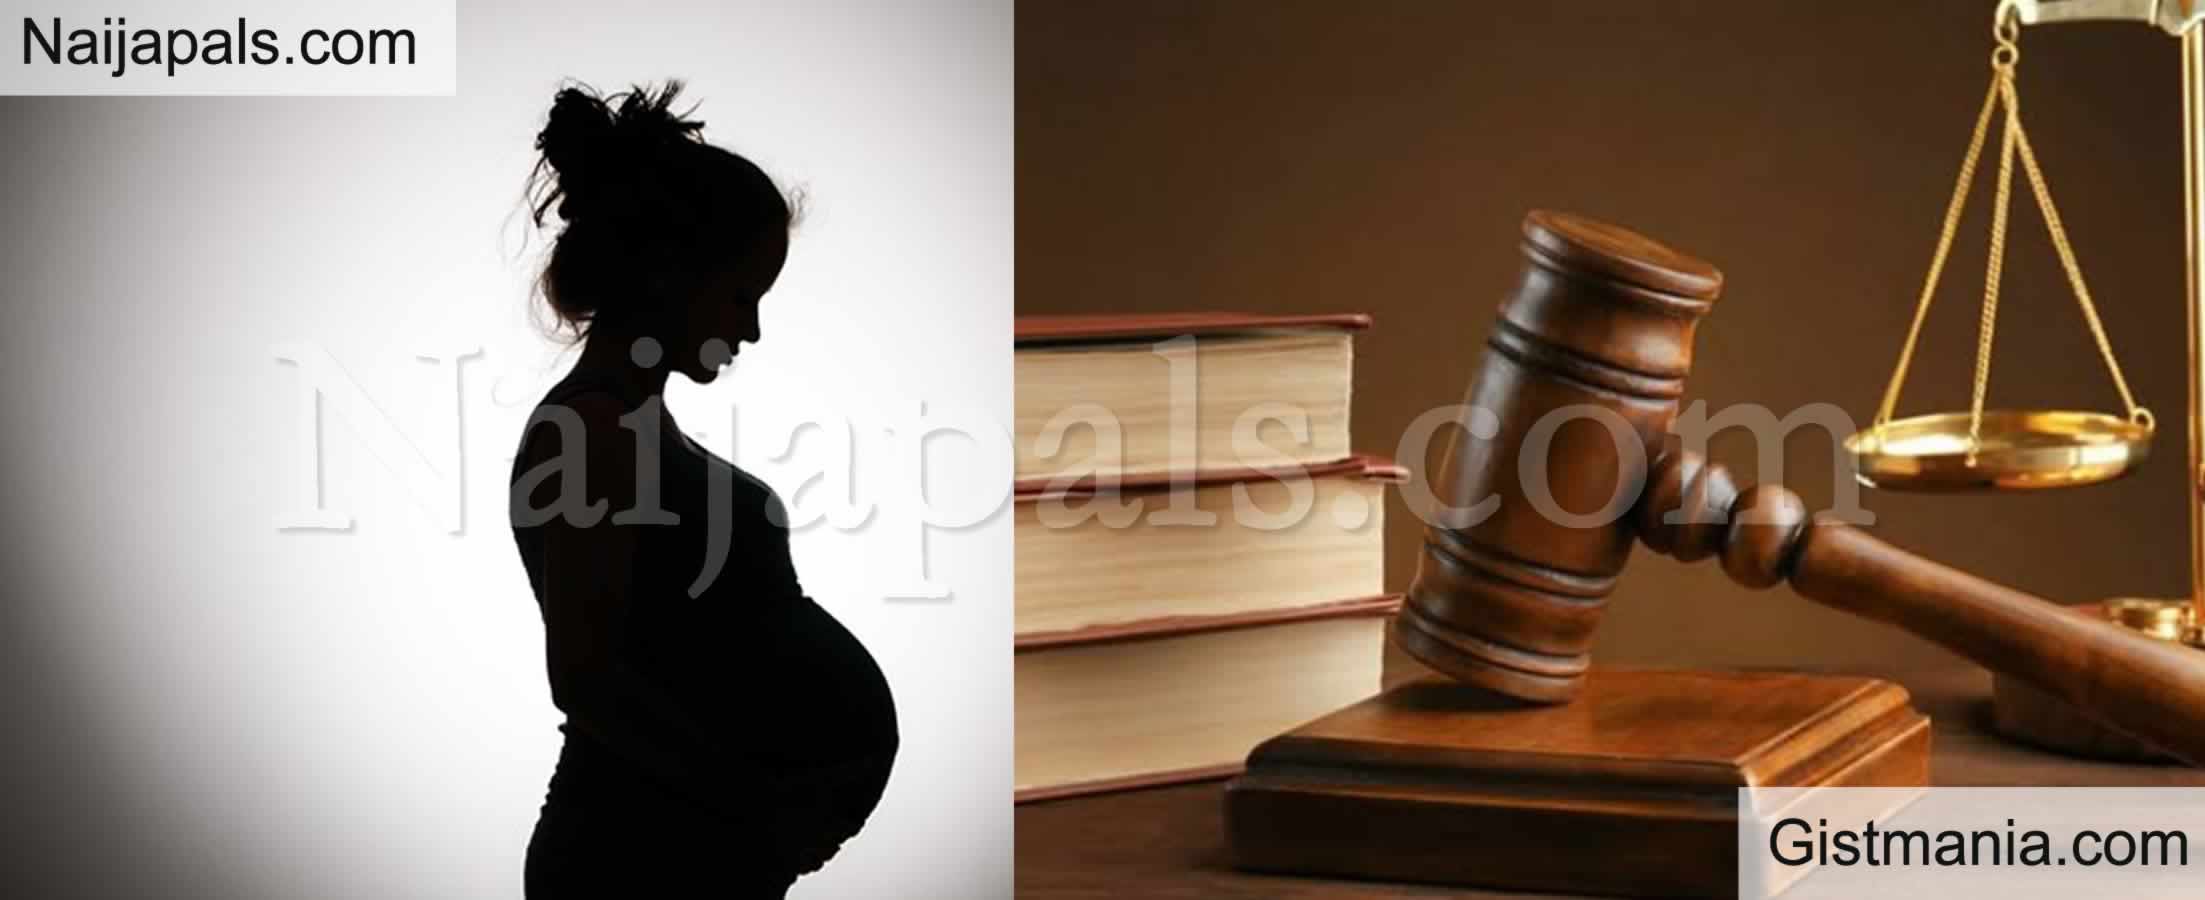 Prostitute Sues Married Client After She Accuses Him Of Getting Her Pregnant